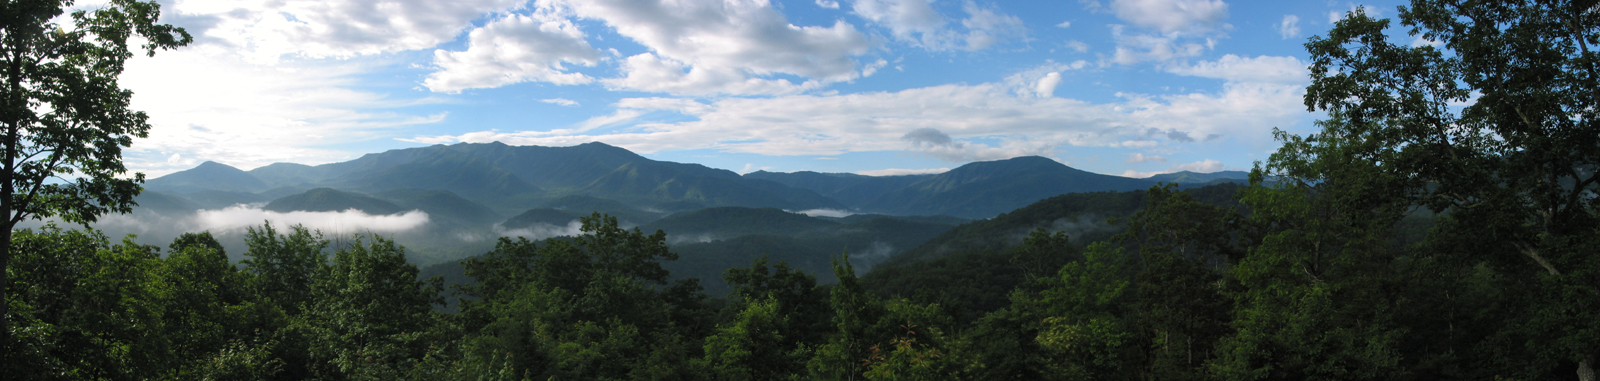 Great Smoky Mountains View